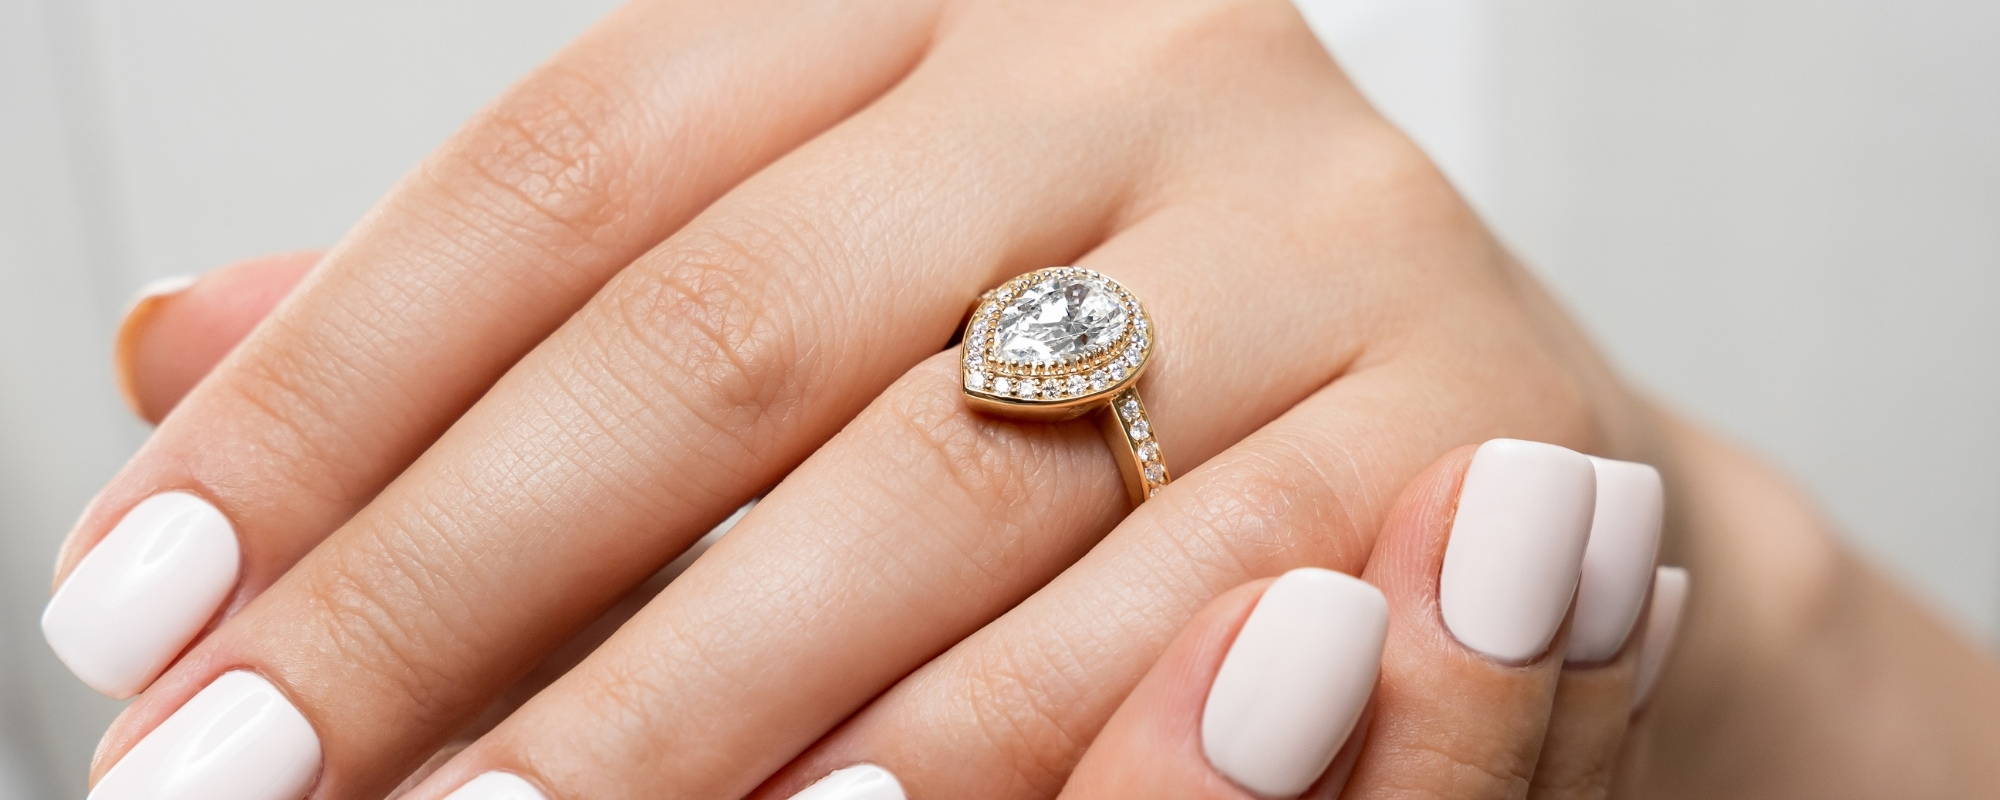 Where to buy vintage engagement rings and antique jewellery